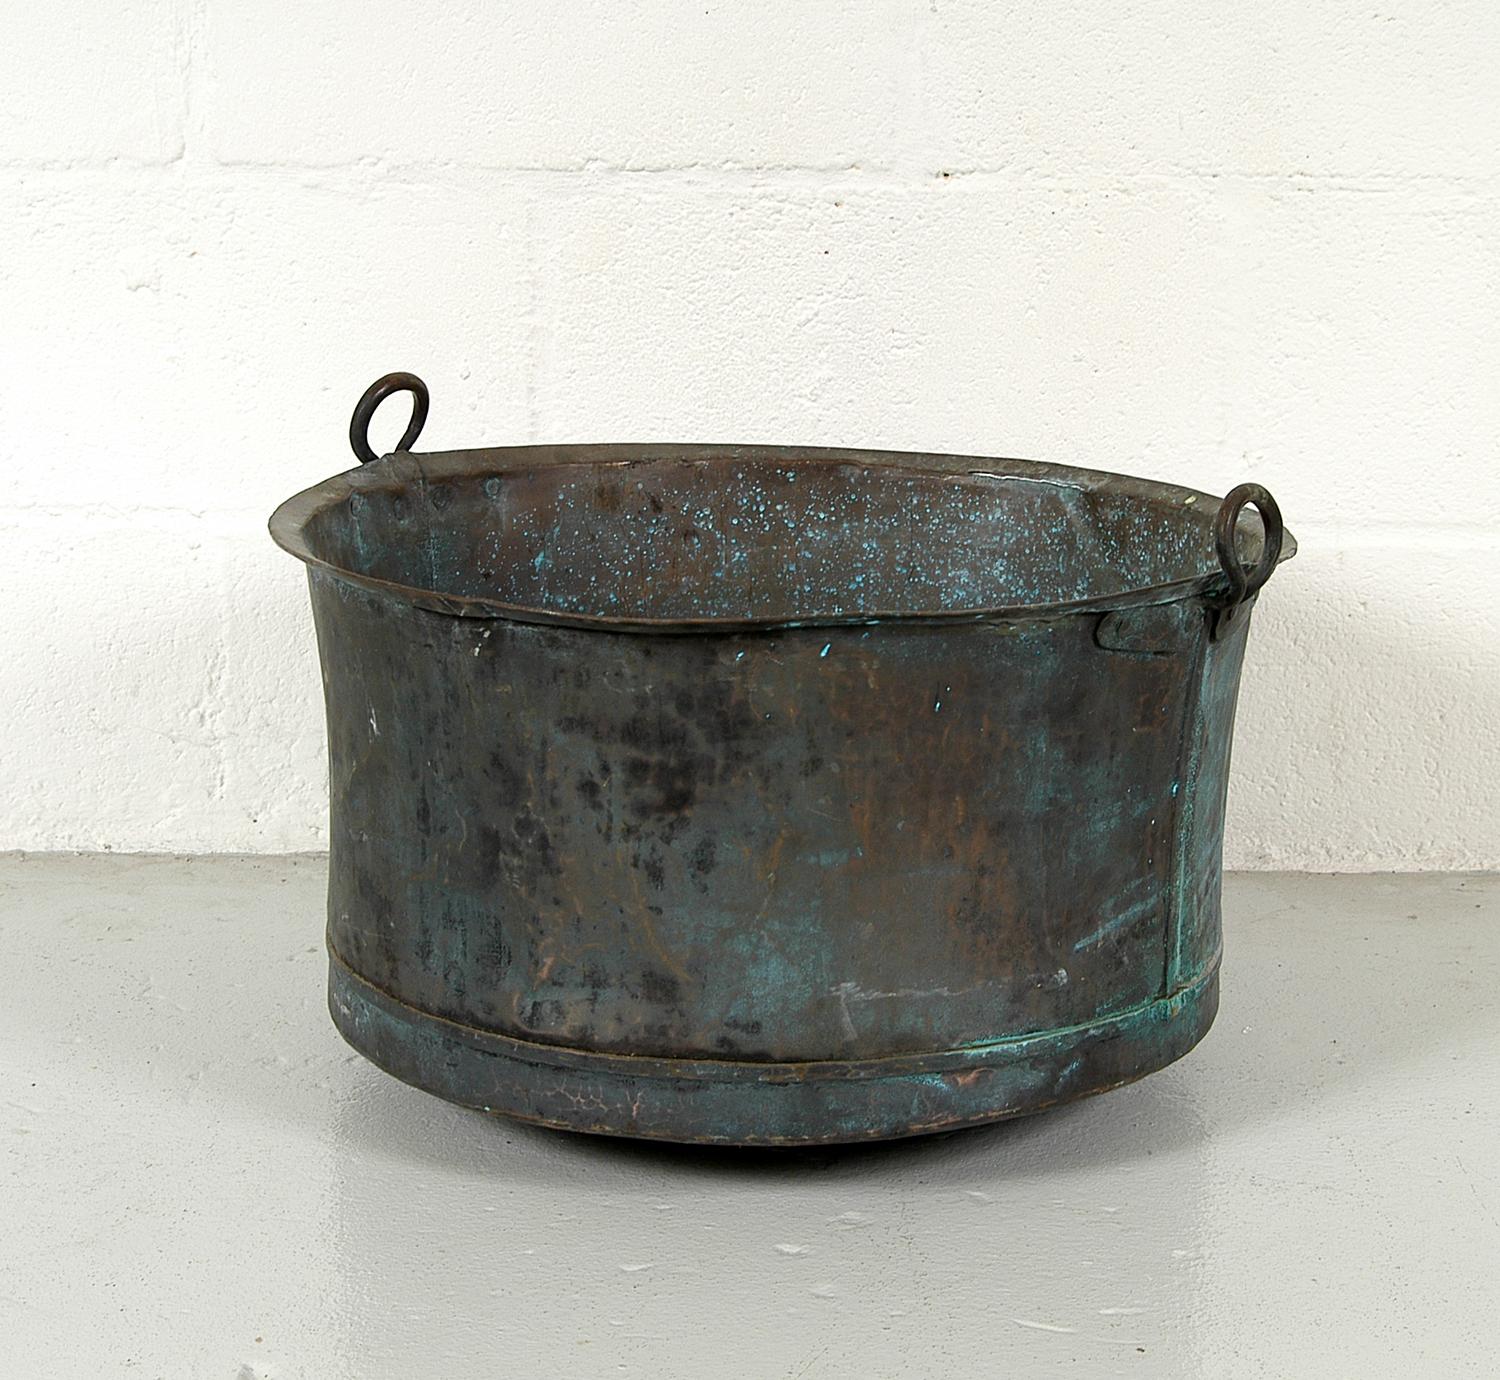 Antique Swedish laundry tub made from hand beaten copper with twin circular wrought copper handles, with the most amazing verdigris patina. This would have originally sat on a steel tripod base, but is now a versatile and useful garden planter.